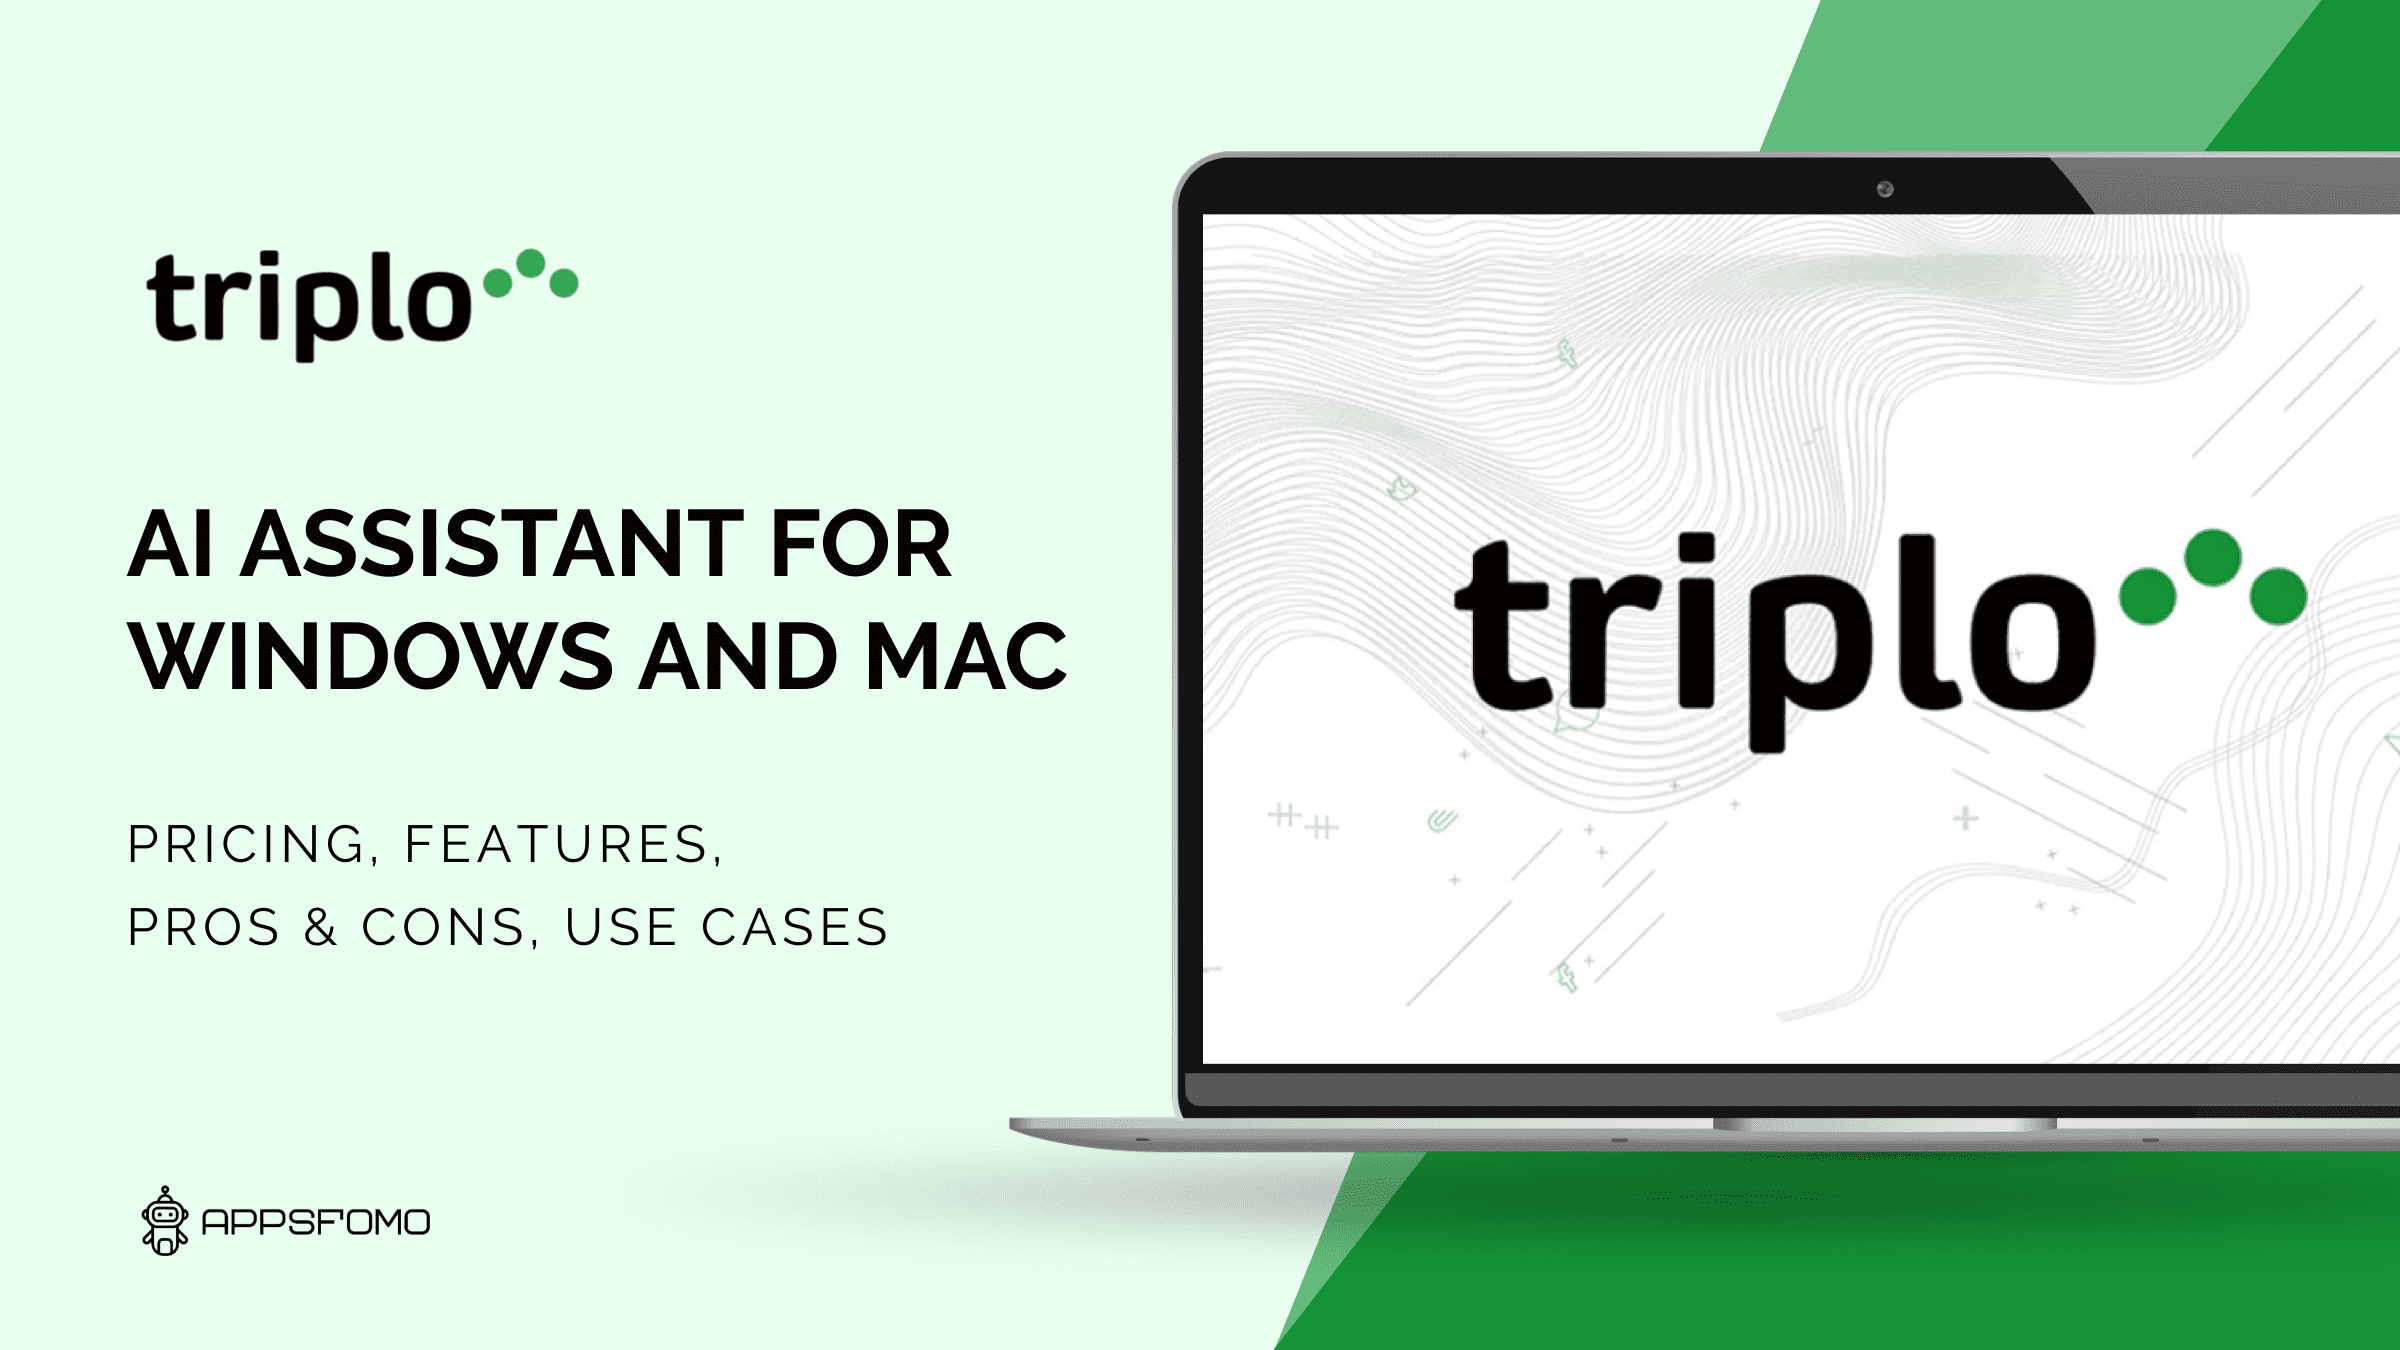 Triplo.ai: AI Assistant for Windows, Mac, Linux, Android and Chromebooks